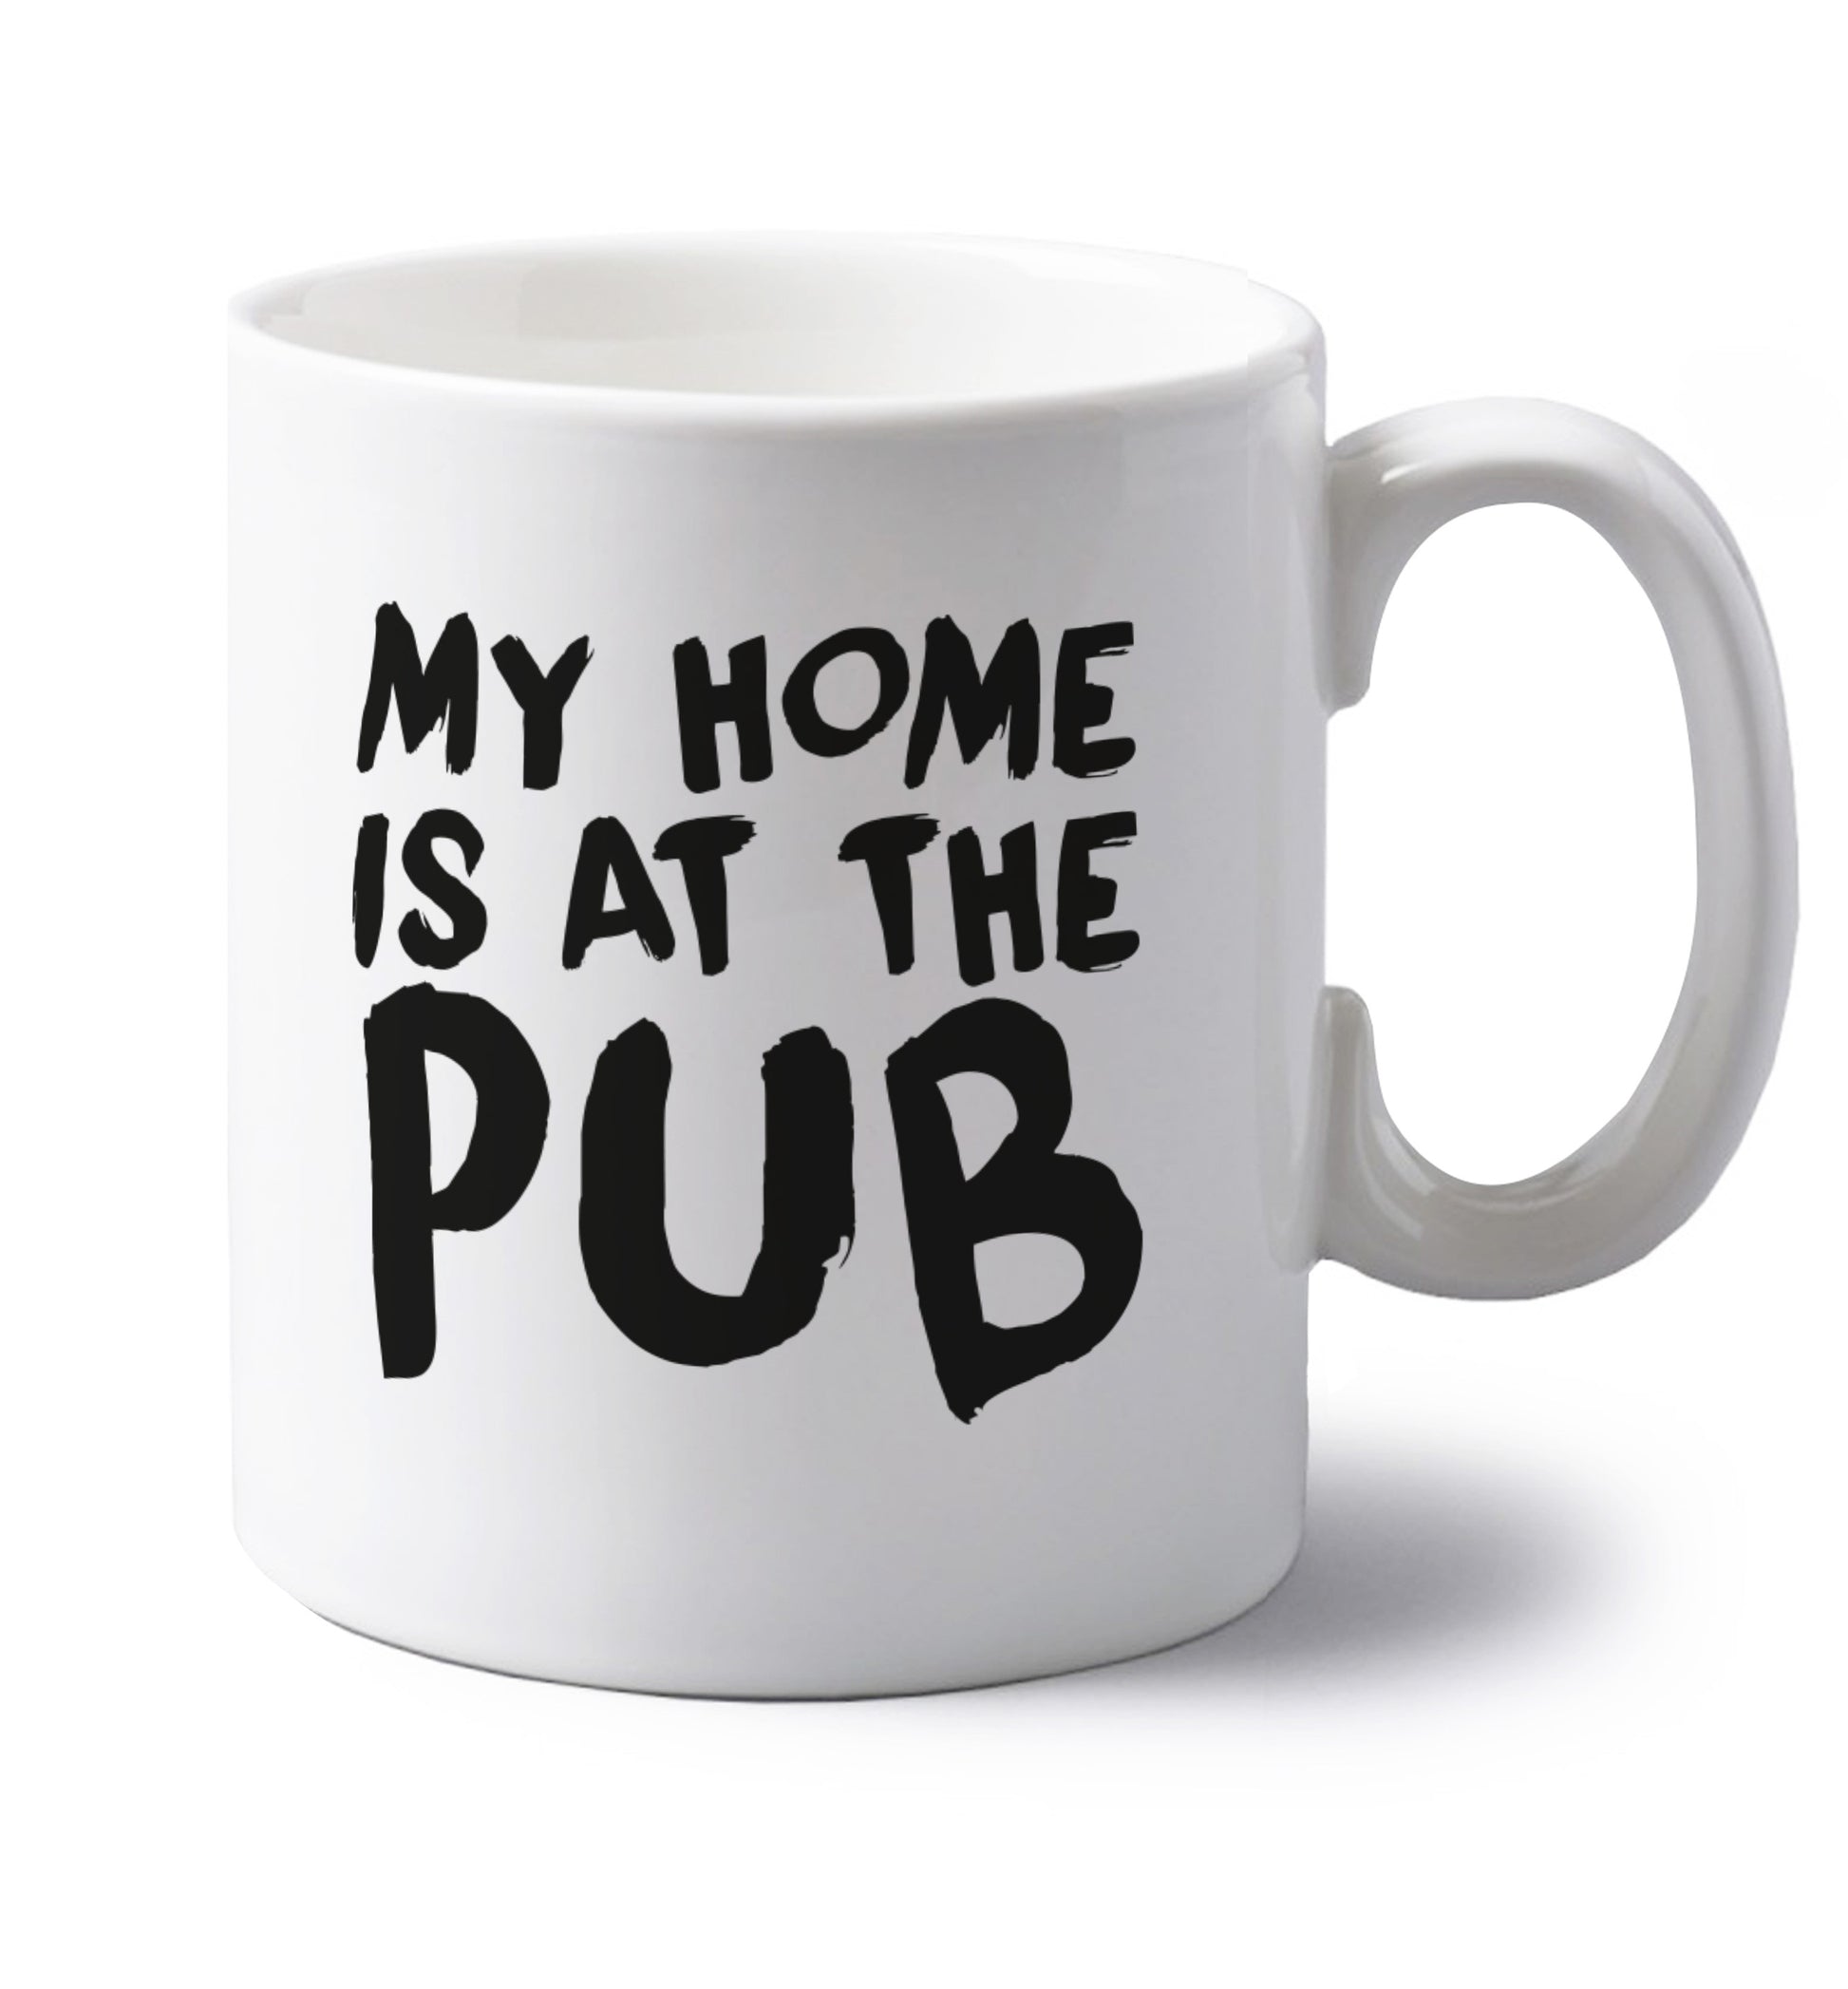 My home is at the pub left handed white ceramic mug 